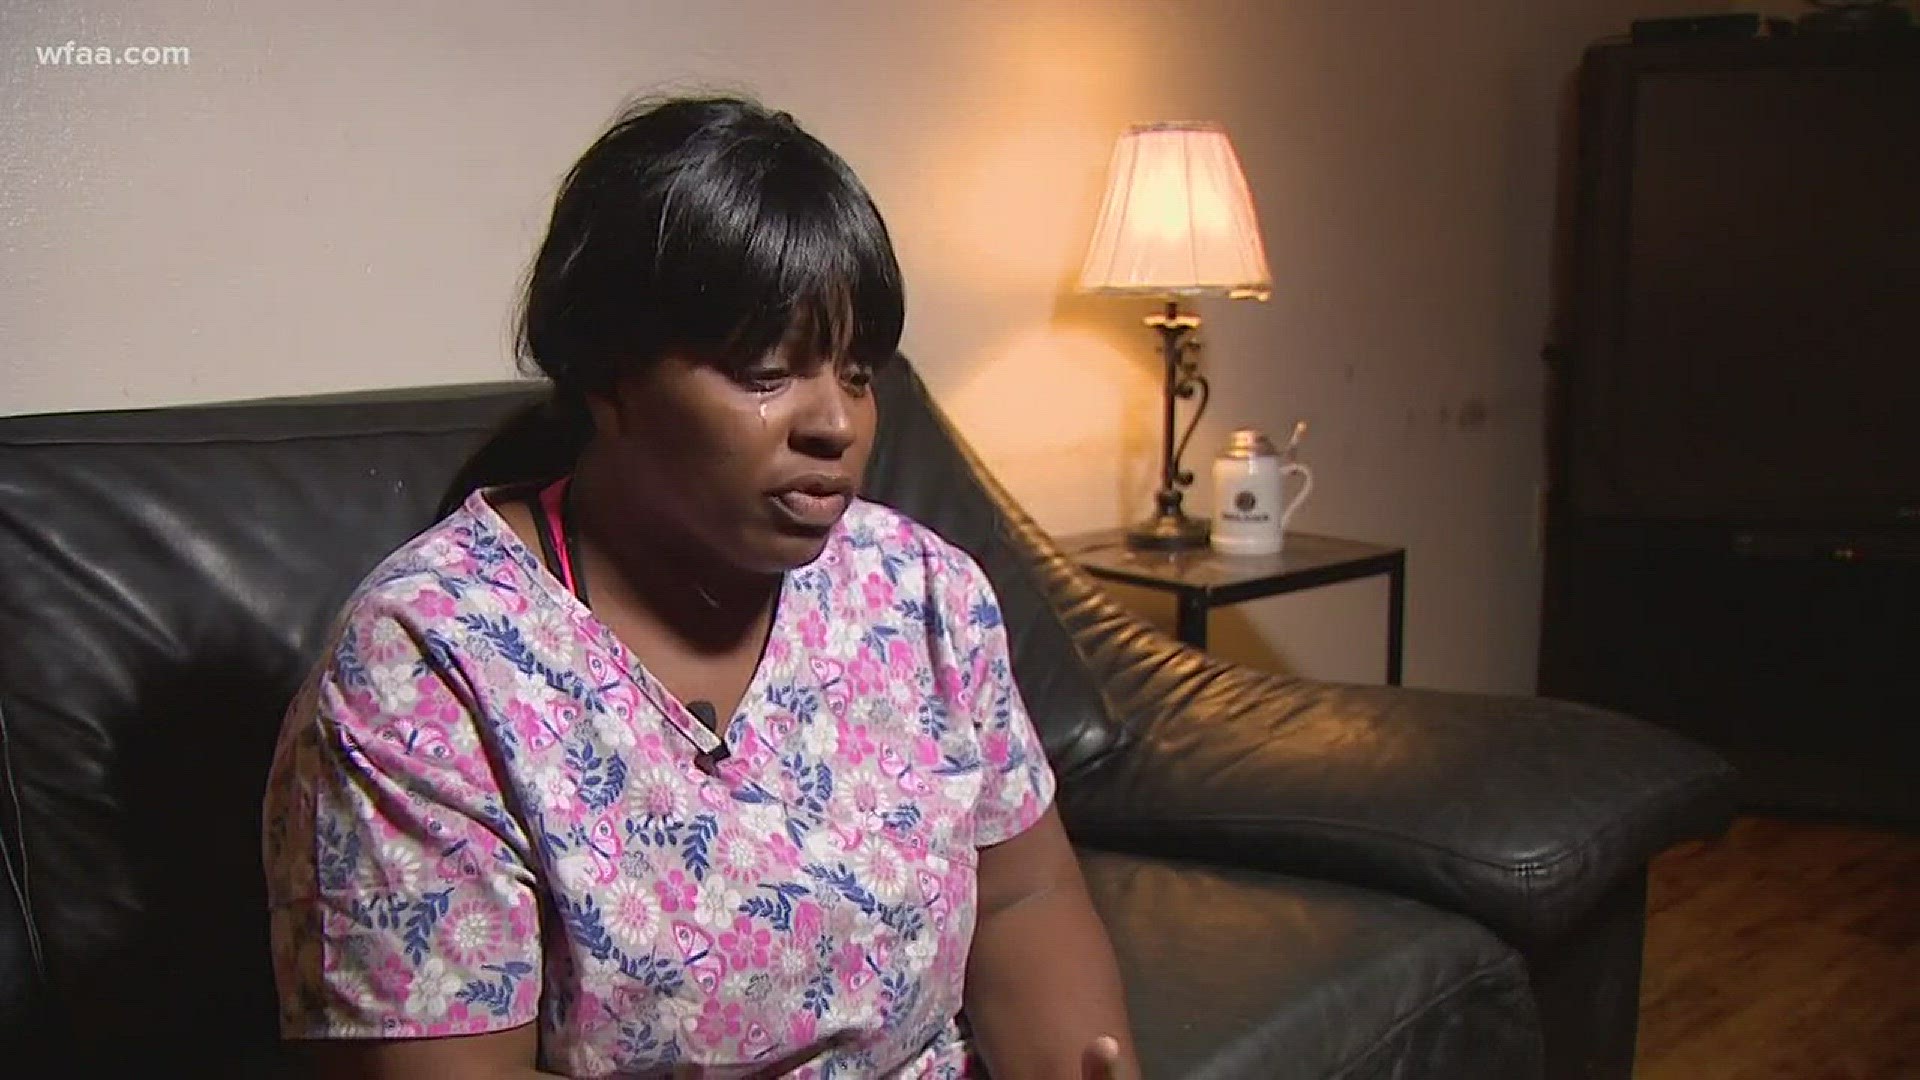 Mother of woman found in trunk wants answers